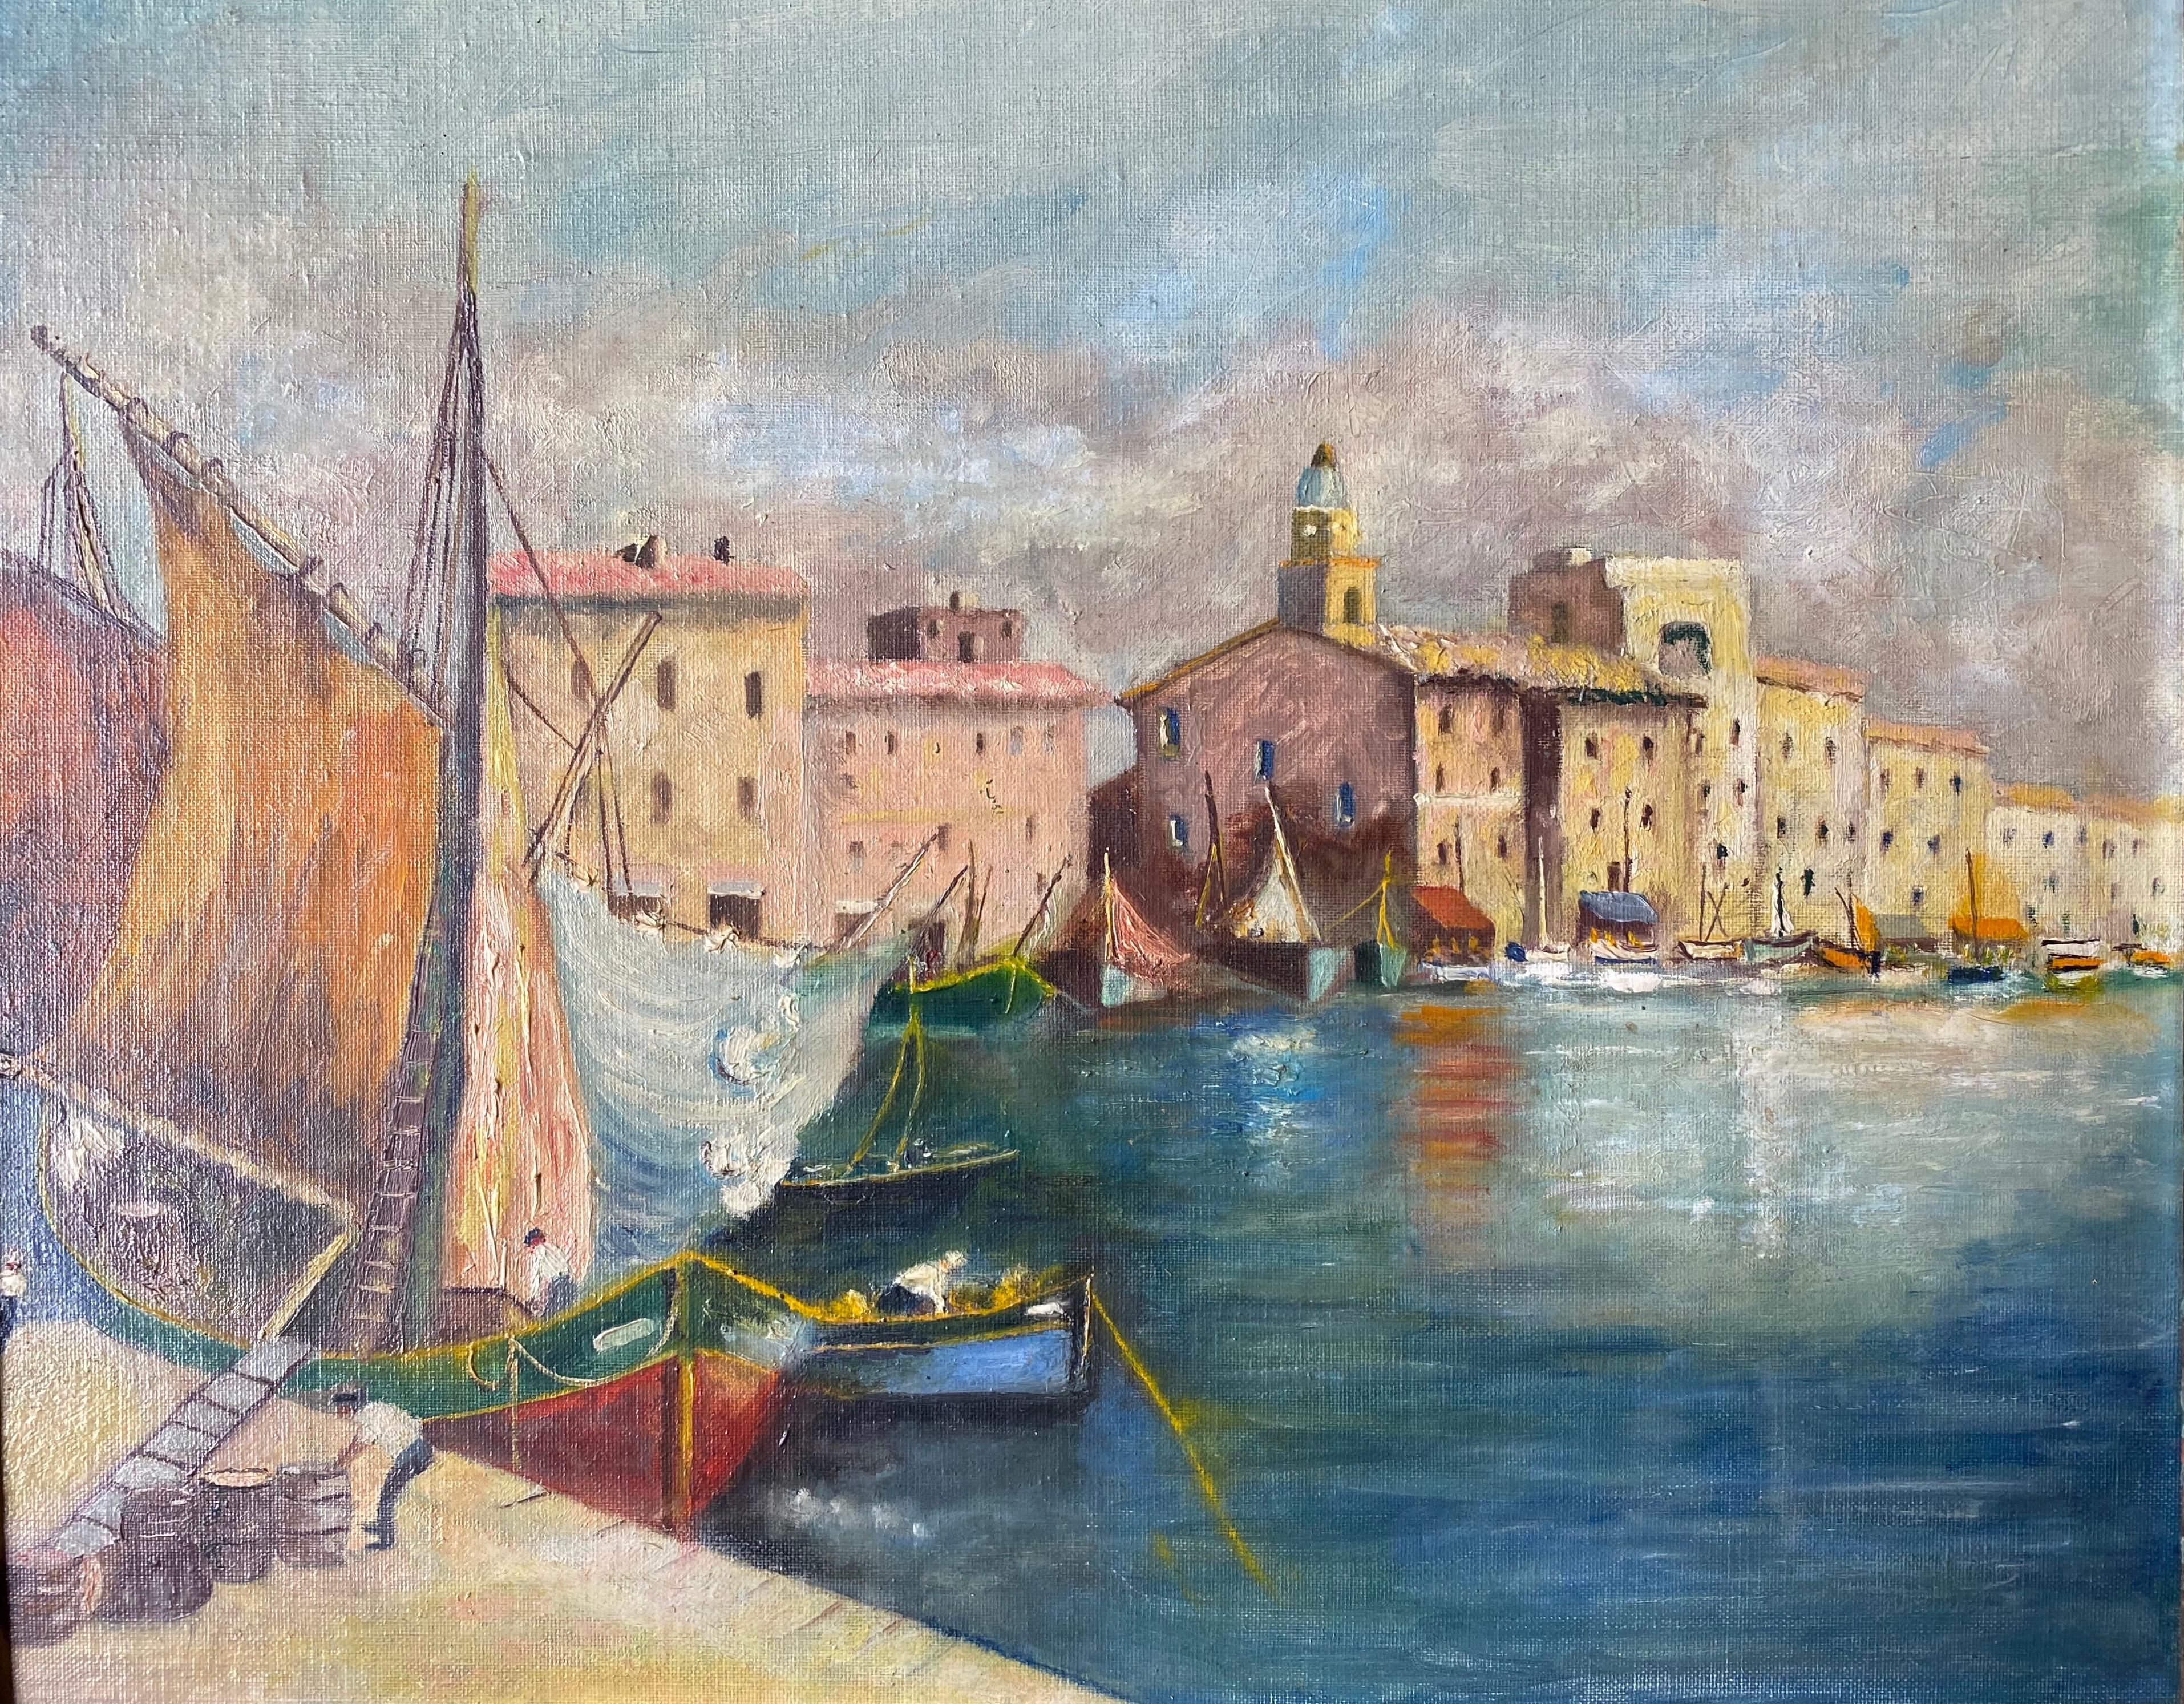 Vintage French Oil Loading the Boats in Mediterranean Sleepy Harbour Town - Painting by Unknown